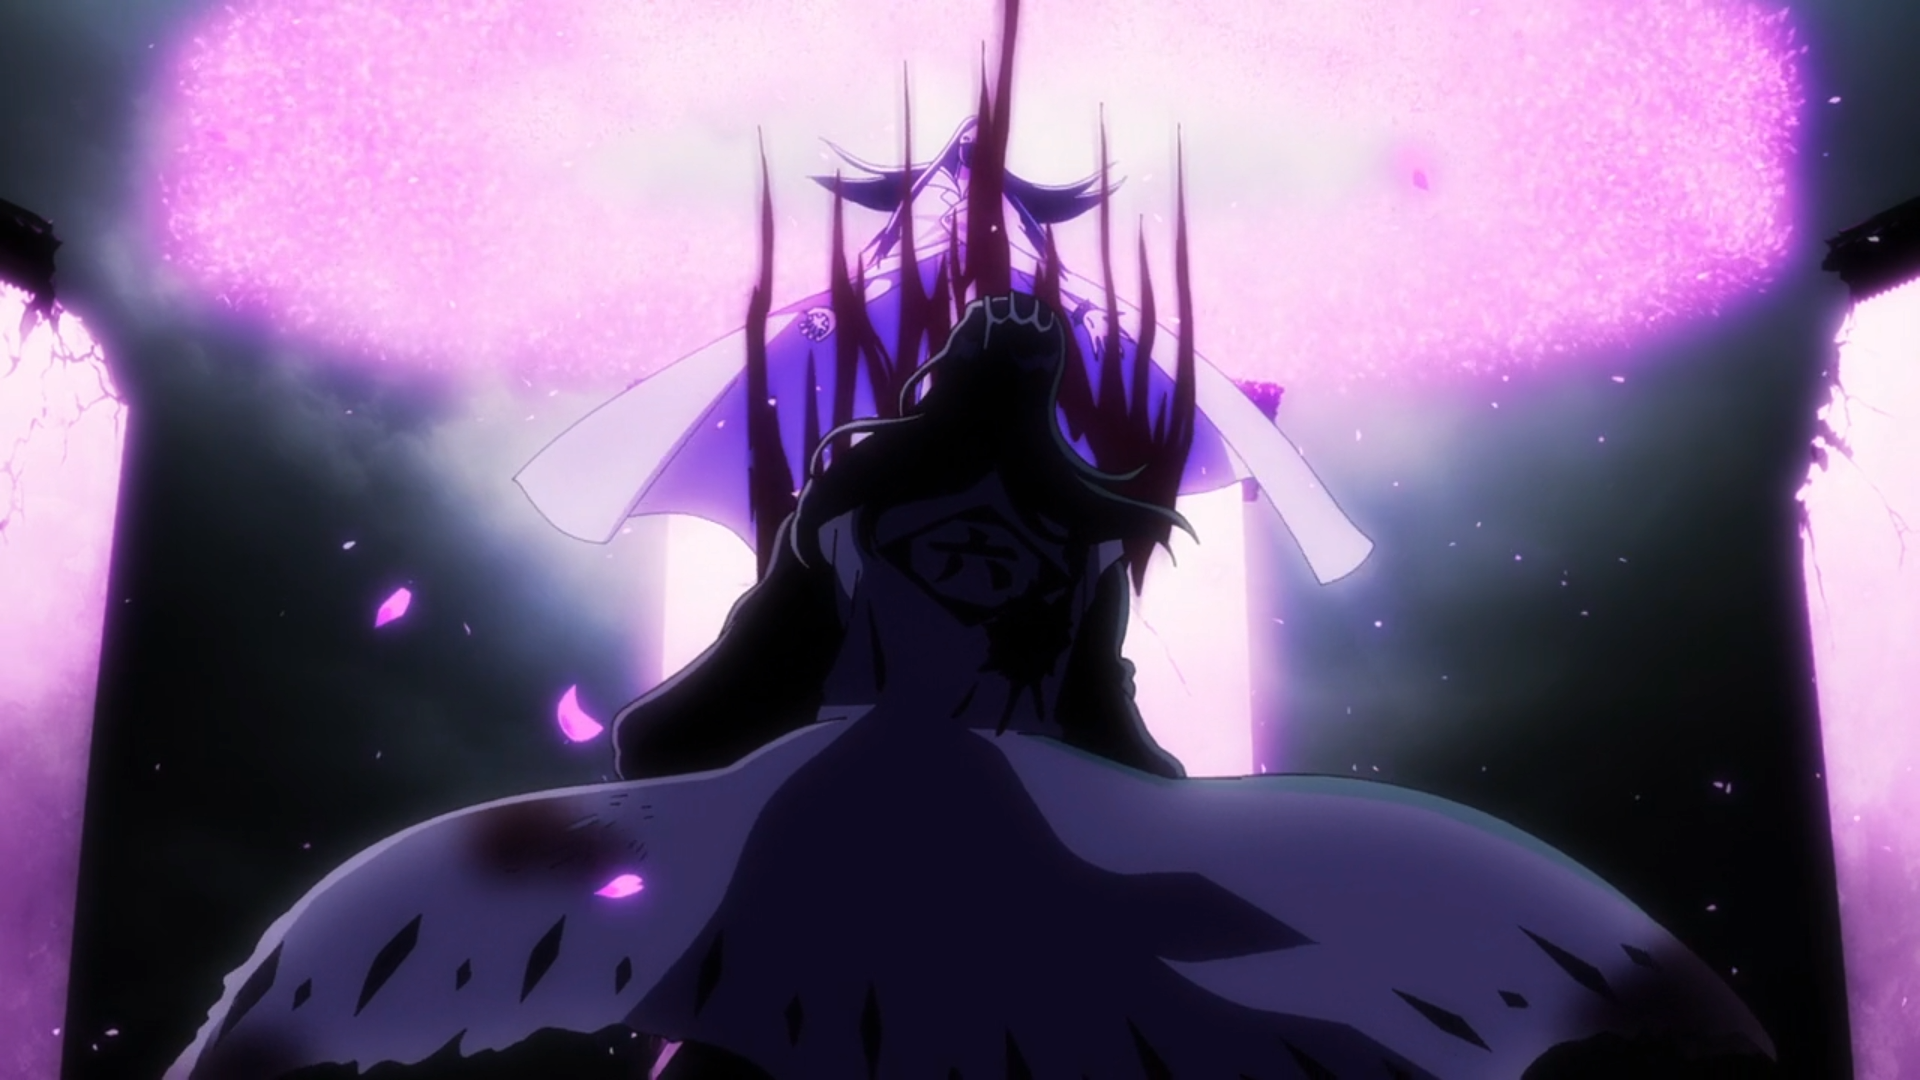 BLEACH: Thousand-Year Blood War Episode 2 Preview Released - Anime Corner